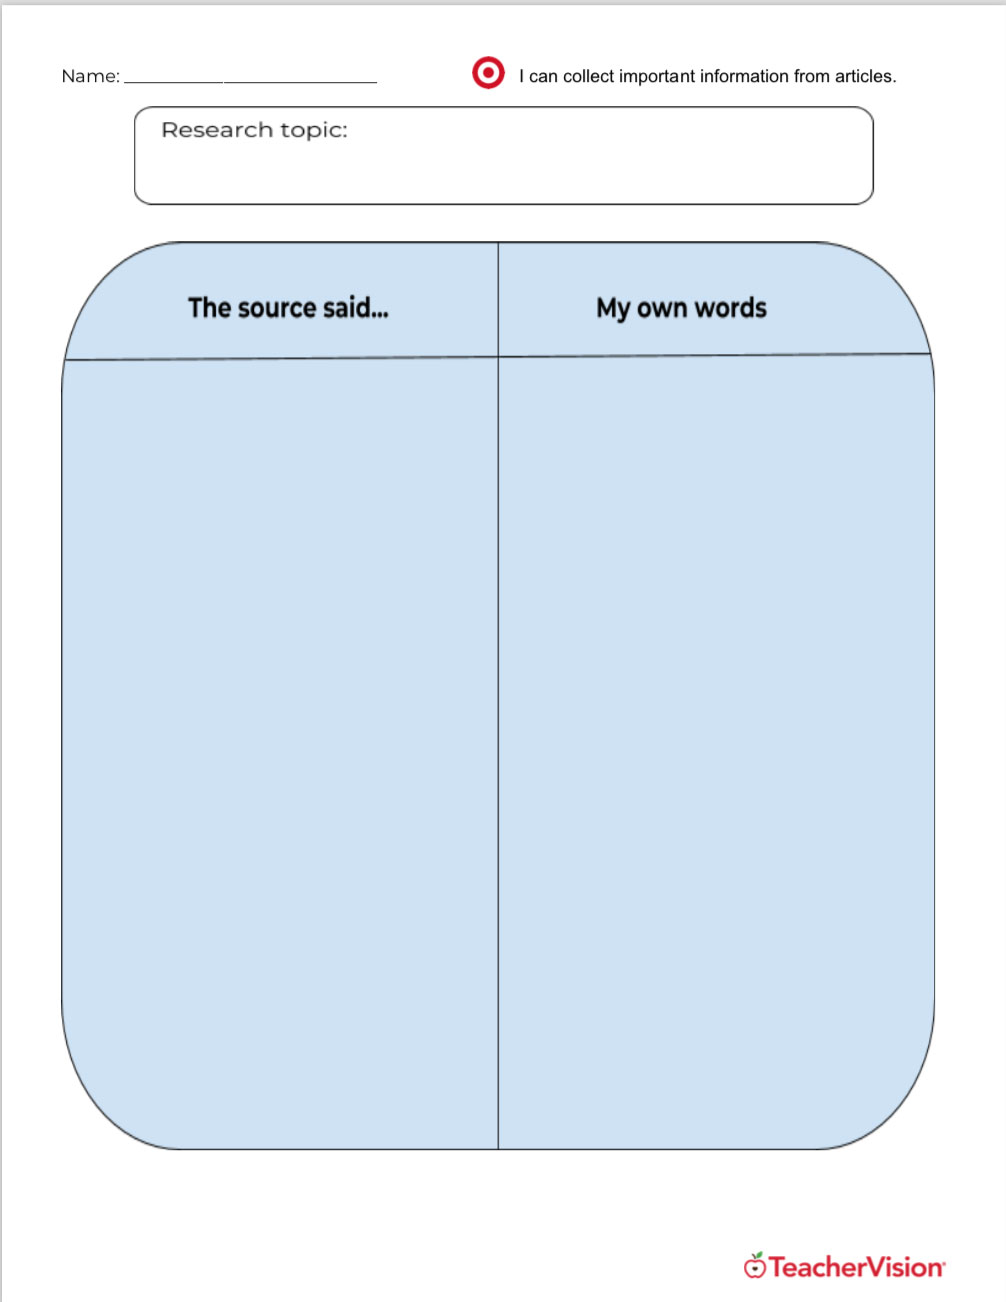 A graphic organizer for paraphrasing research 